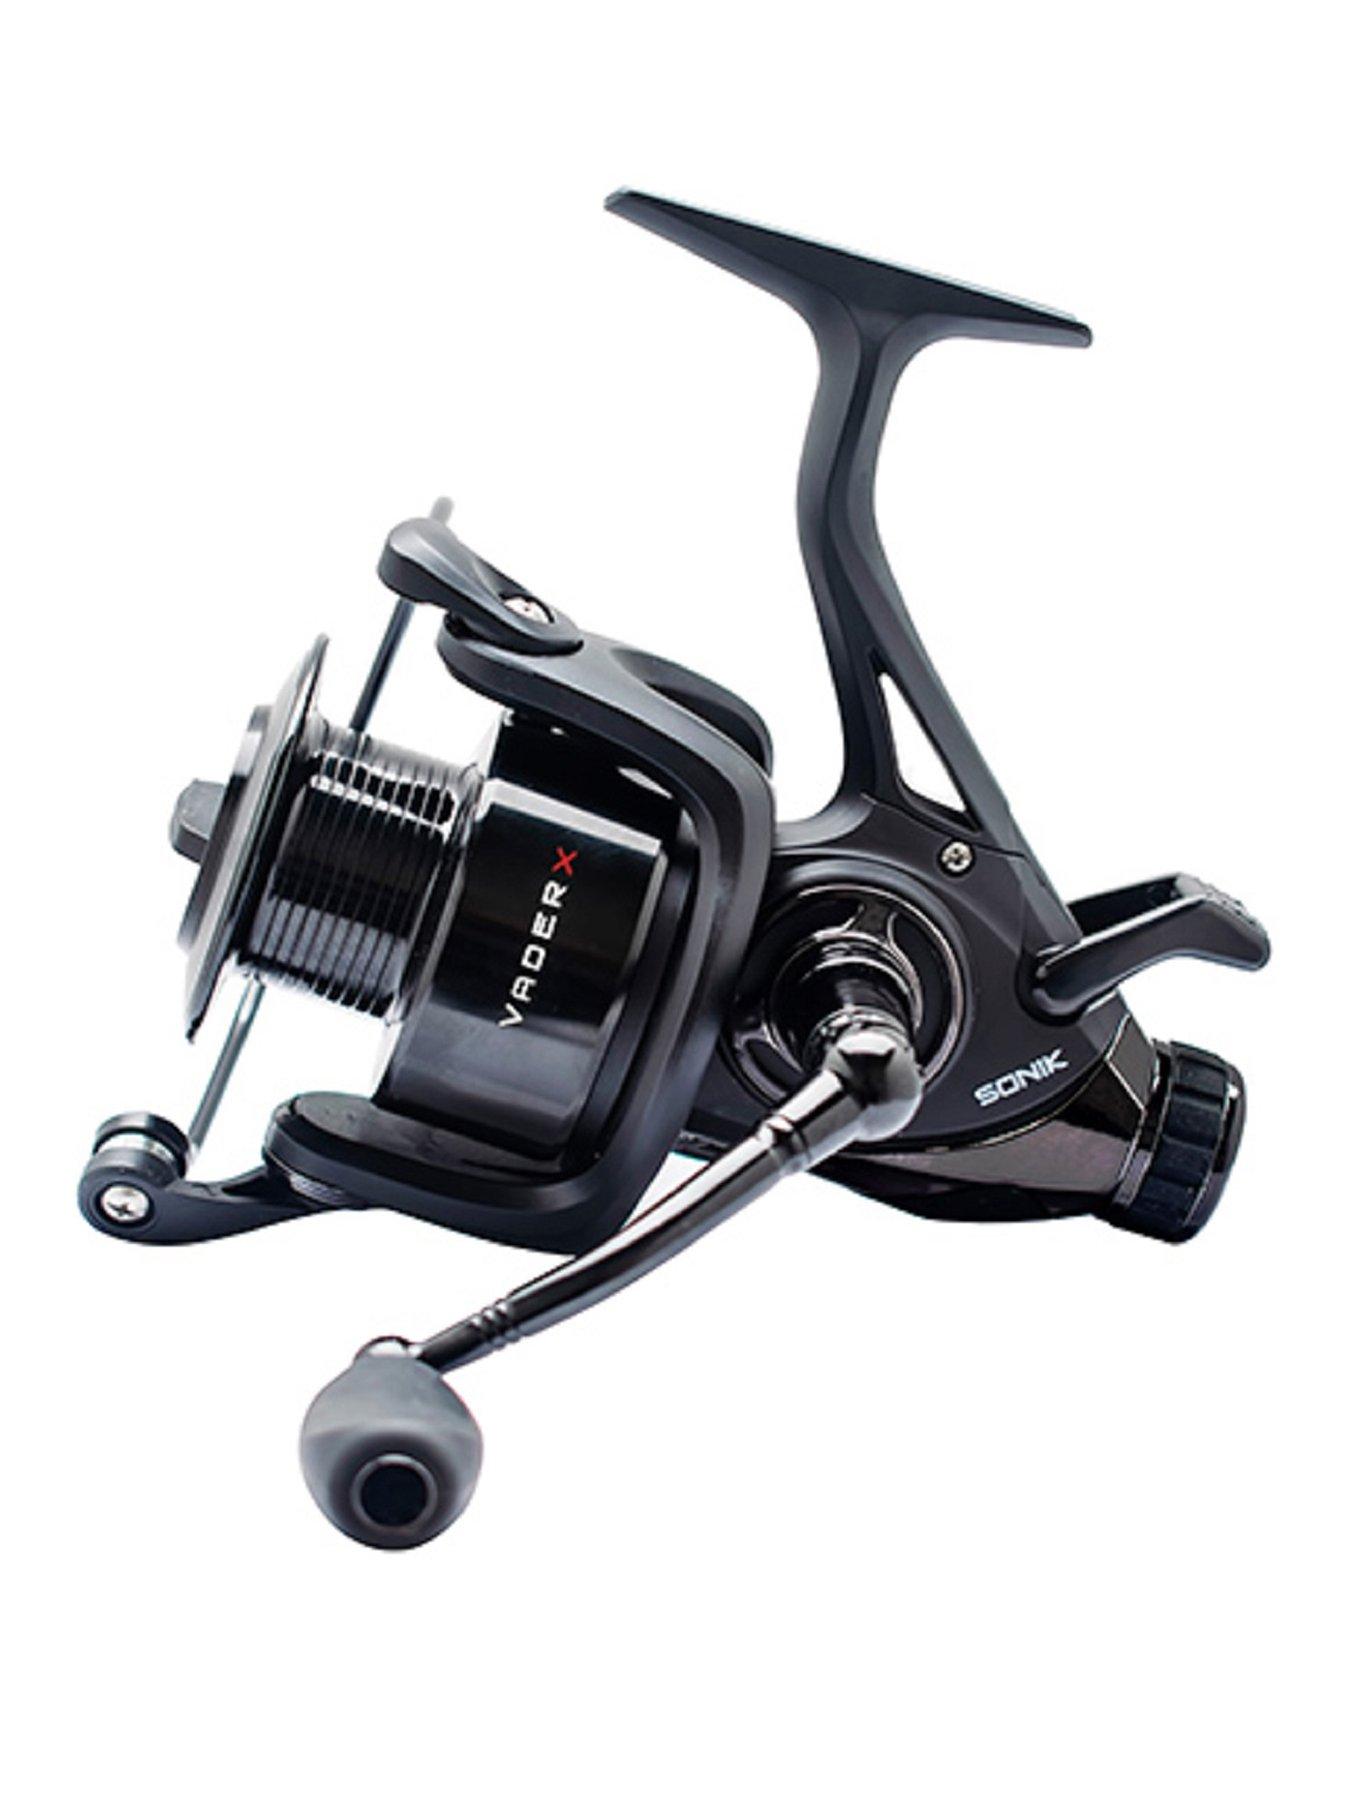 The Outdoor Line Forum • View topic - FS Reels, Reels and then